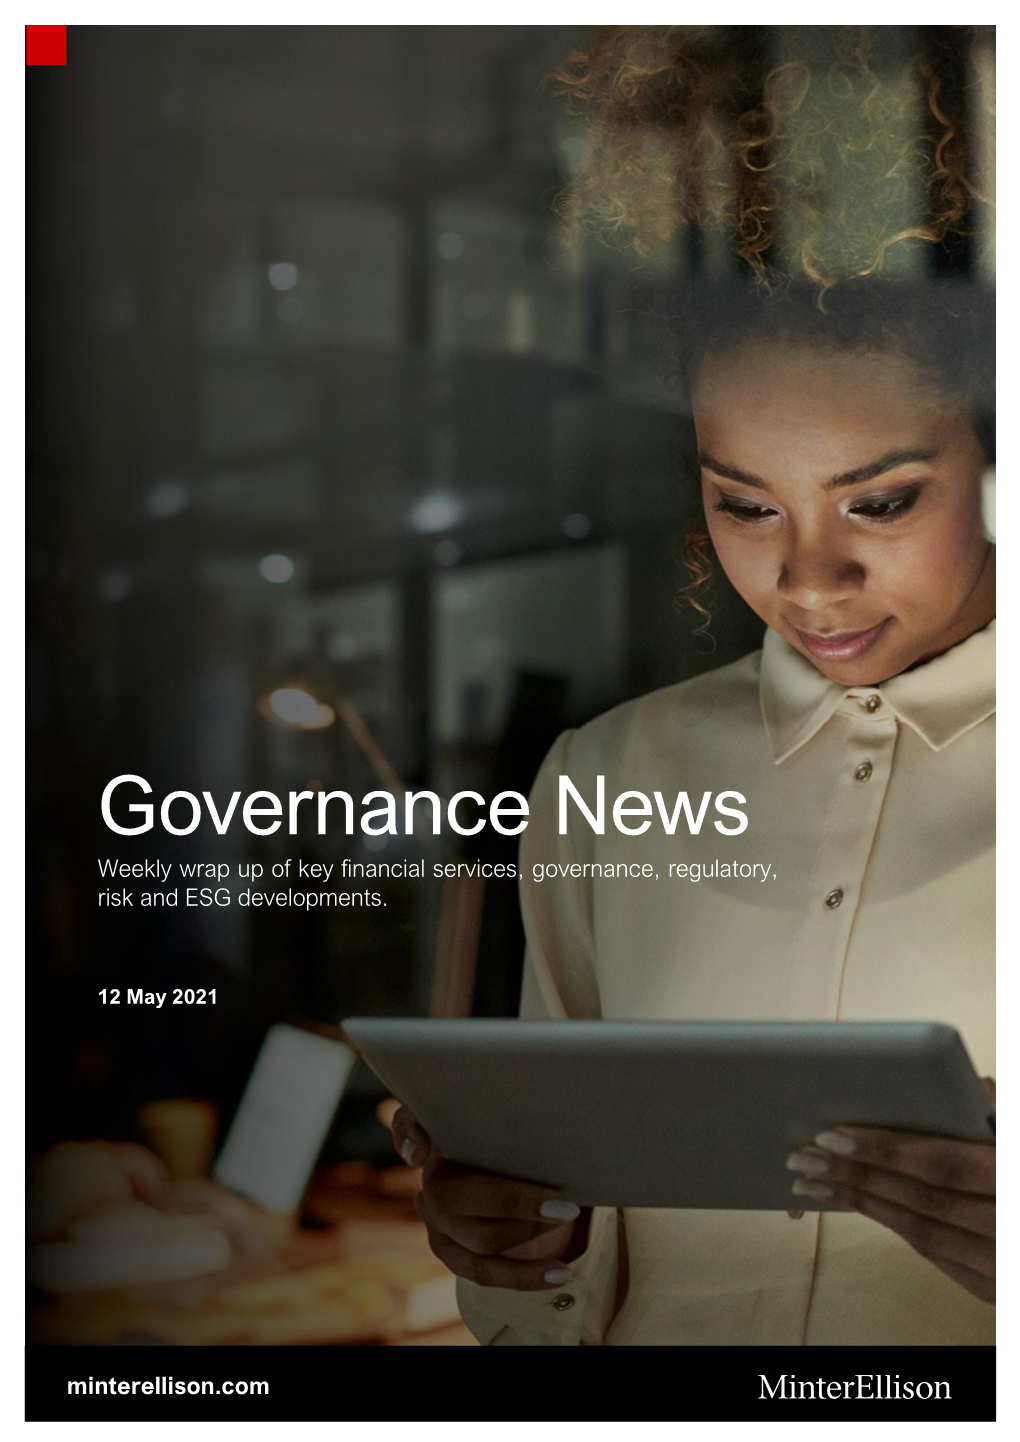 Governance News Weekly Wrap up of Key Financial Services, Governance, Regulatory, Risk and ESG Developments